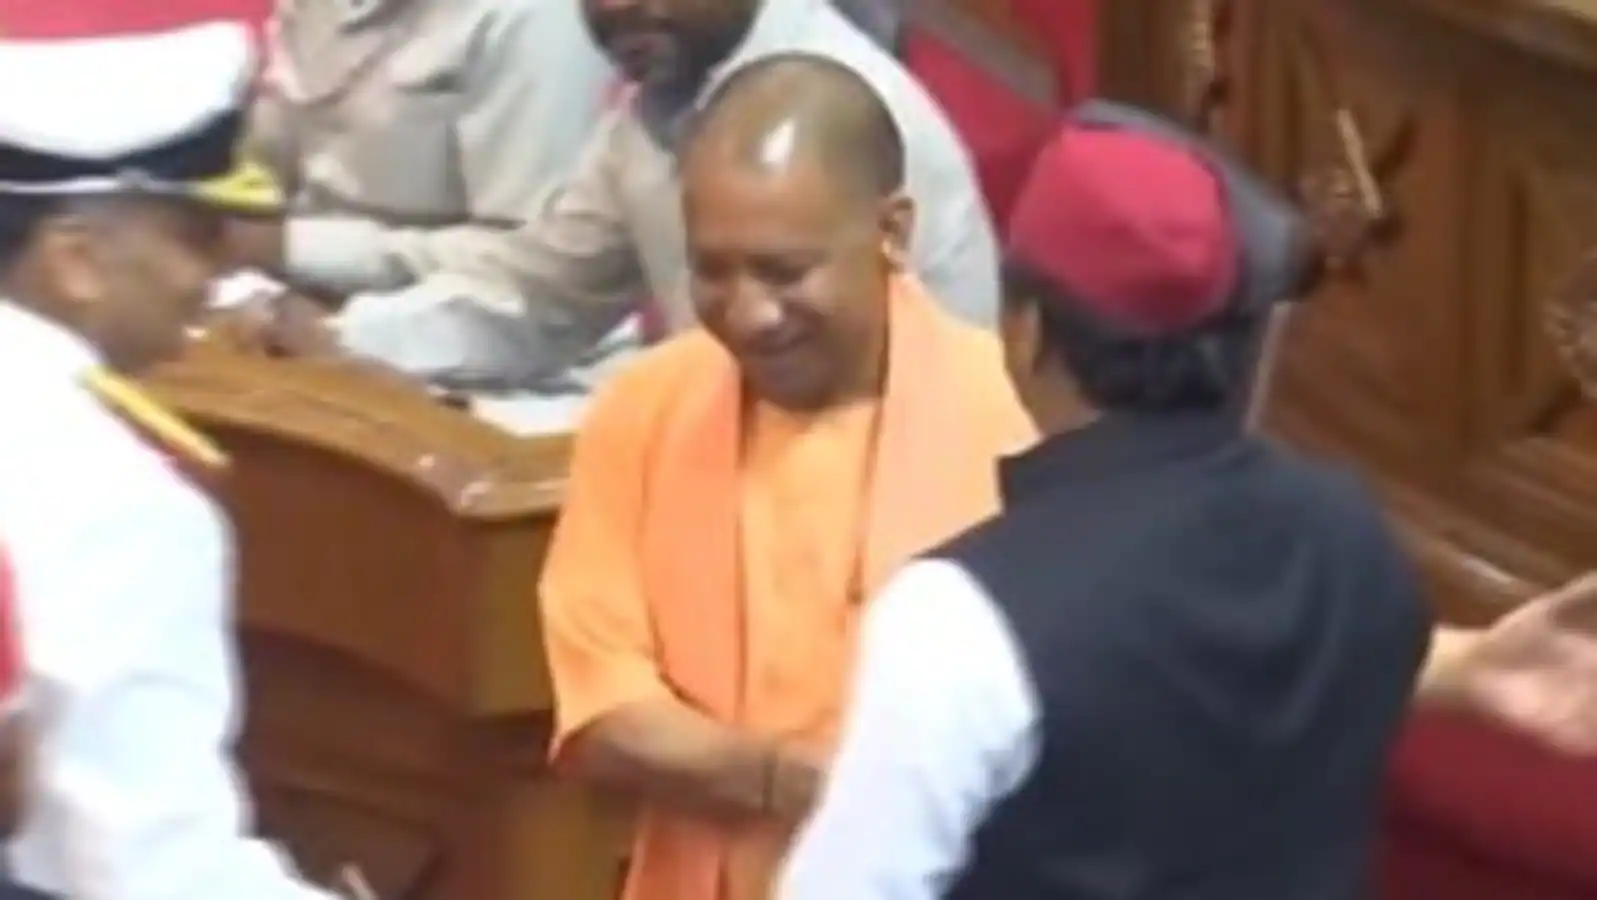 Video: Moment where Yogi, Akhilesh Yadav greeted each other with a smile